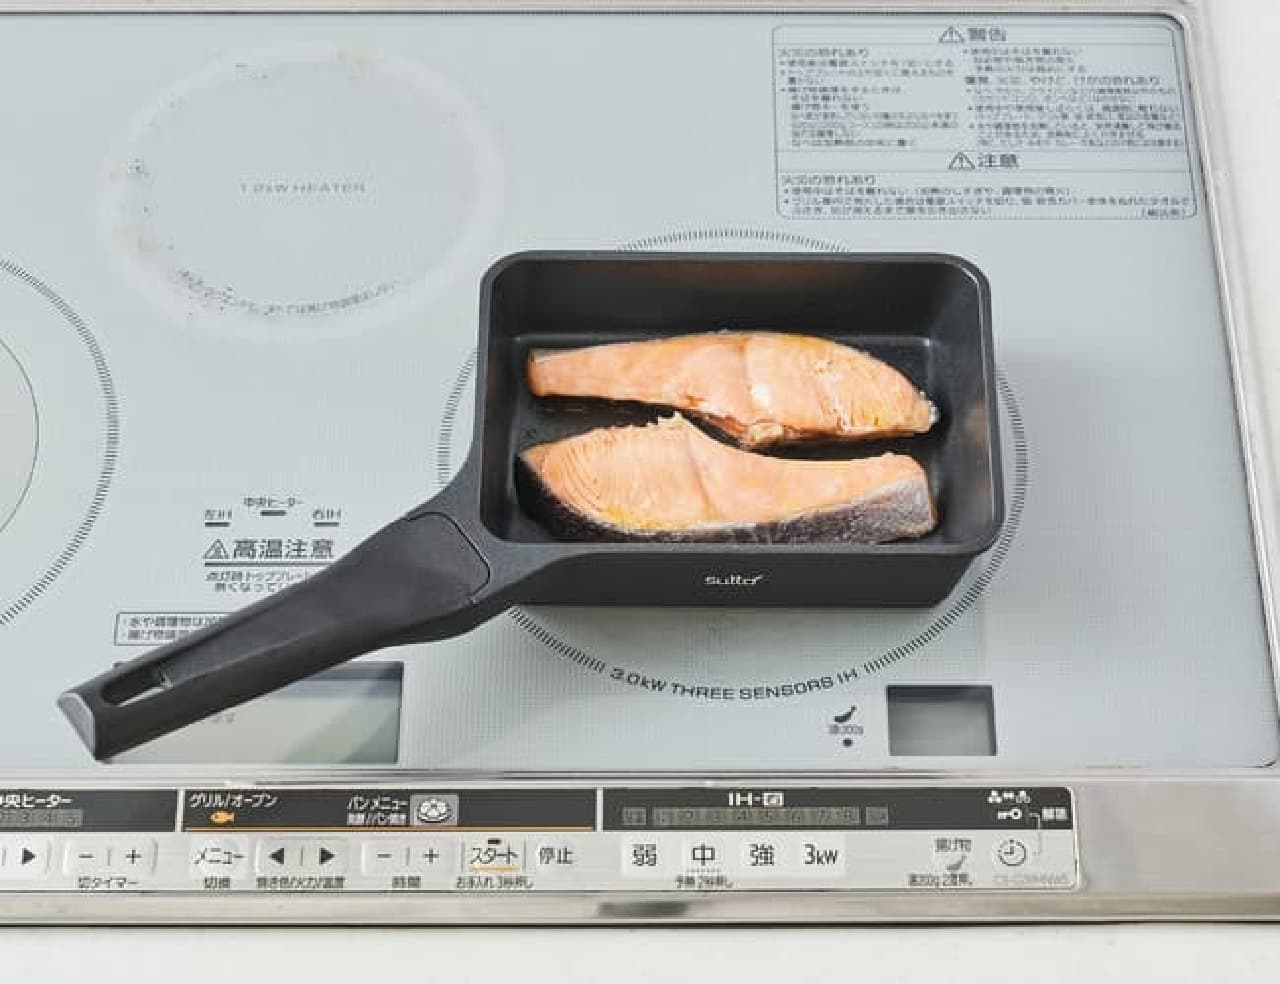 Introducing "sutto square frying pan" --Hit products are compact! Suitable for 1 serving and small amount of cooking